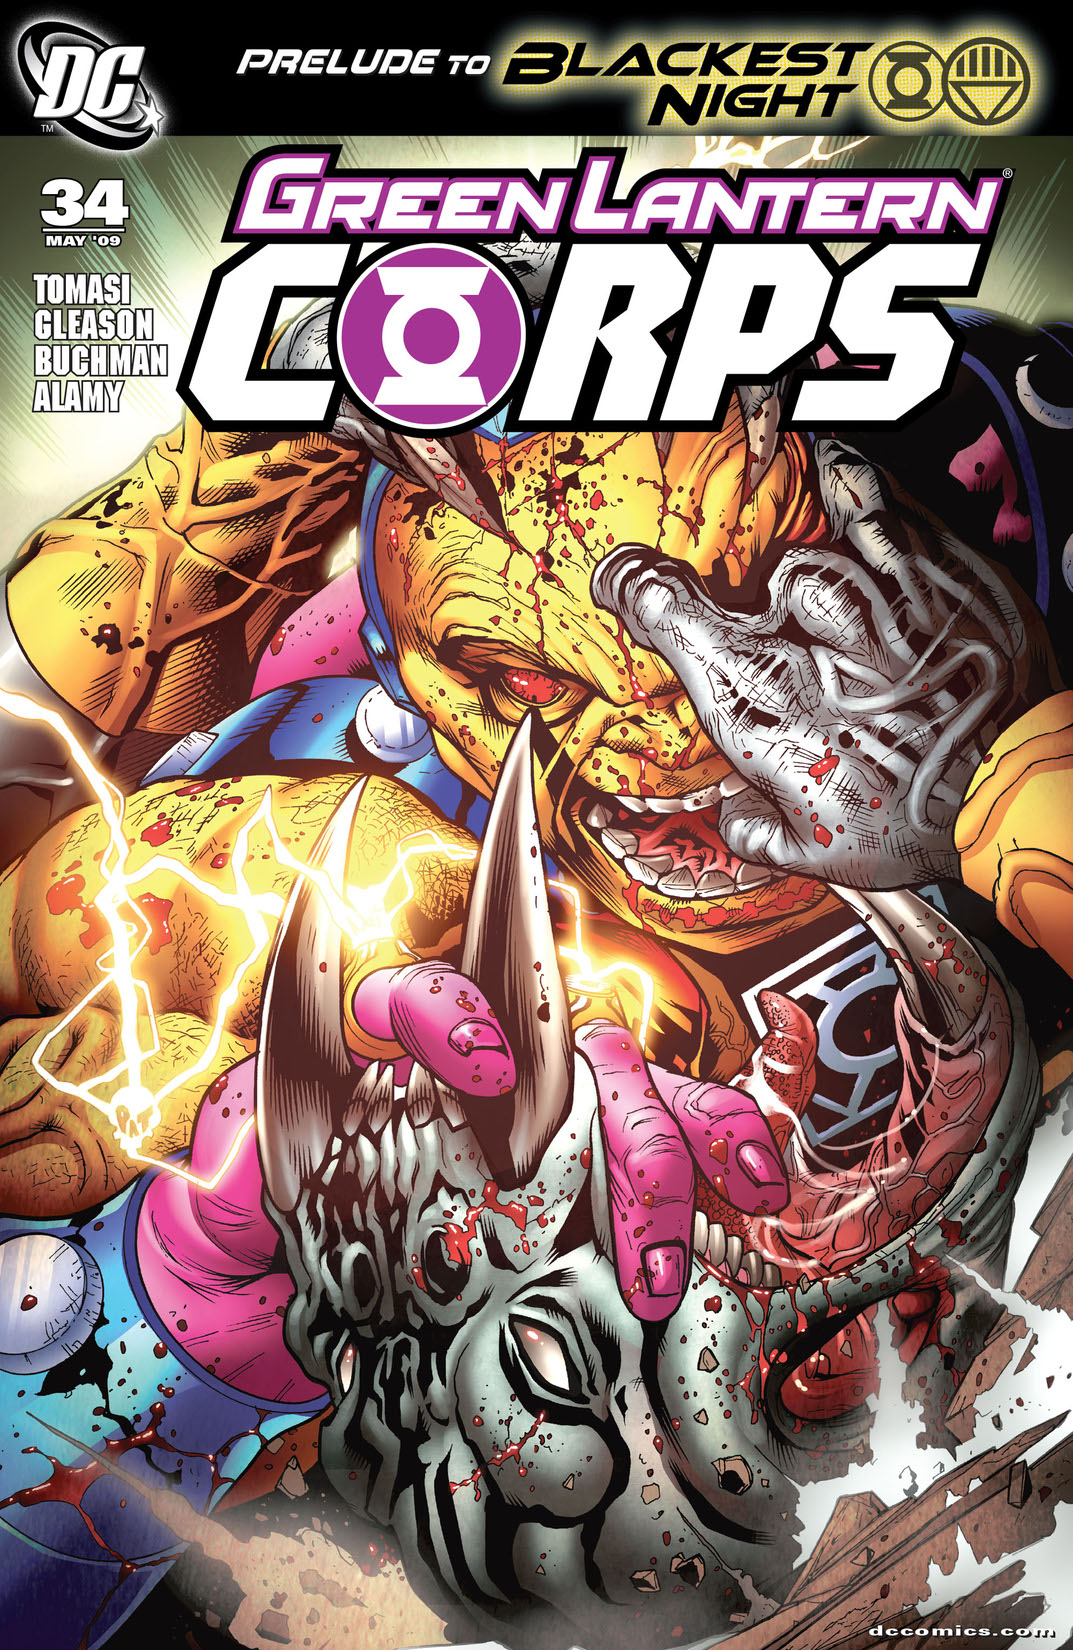 Green Lantern Corps (2006-) #34 preview images